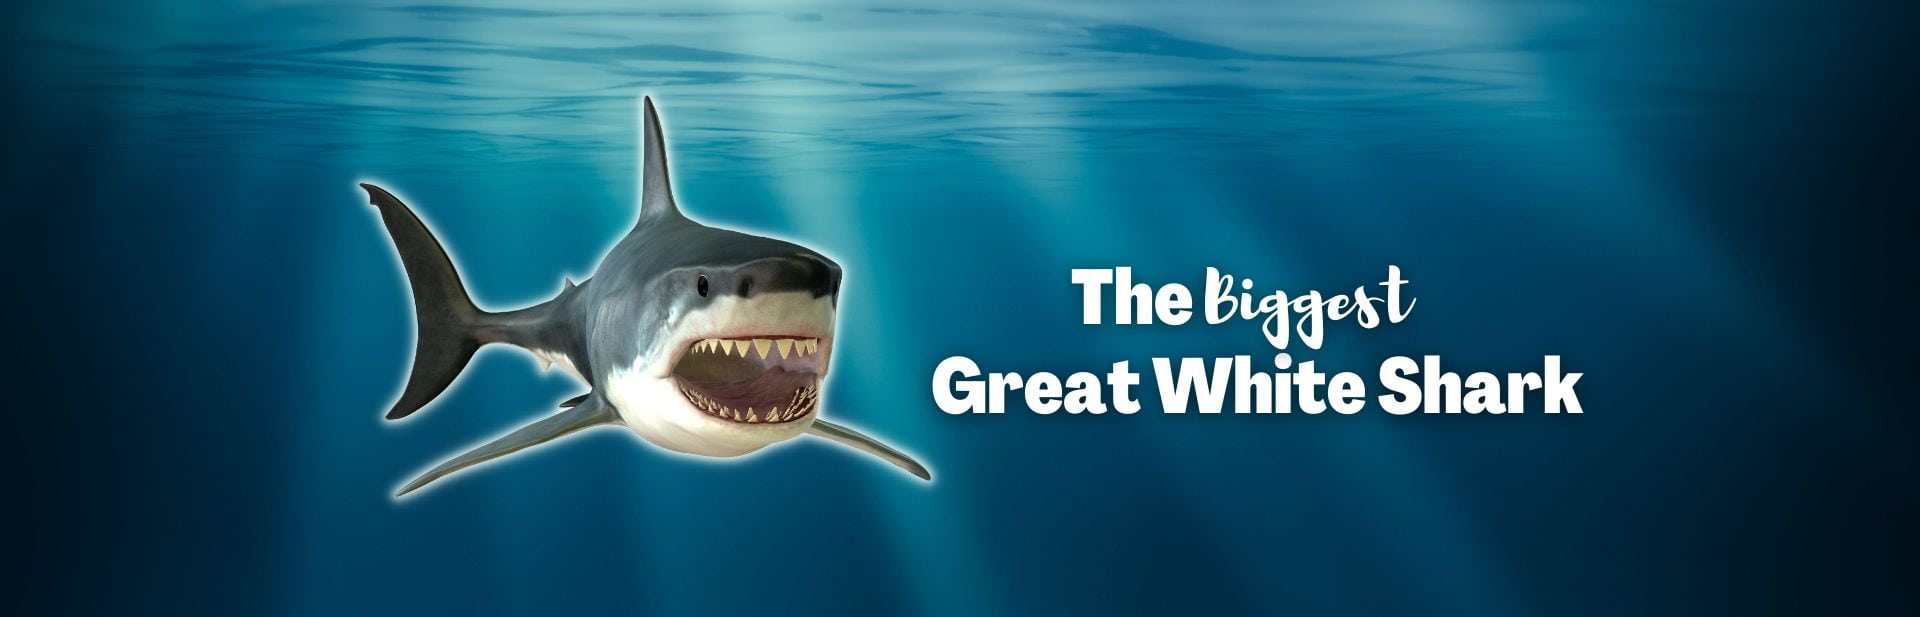 The Sea’s Most Infamous Predator: What’s the Biggest Great White Shark Ever Recorded?